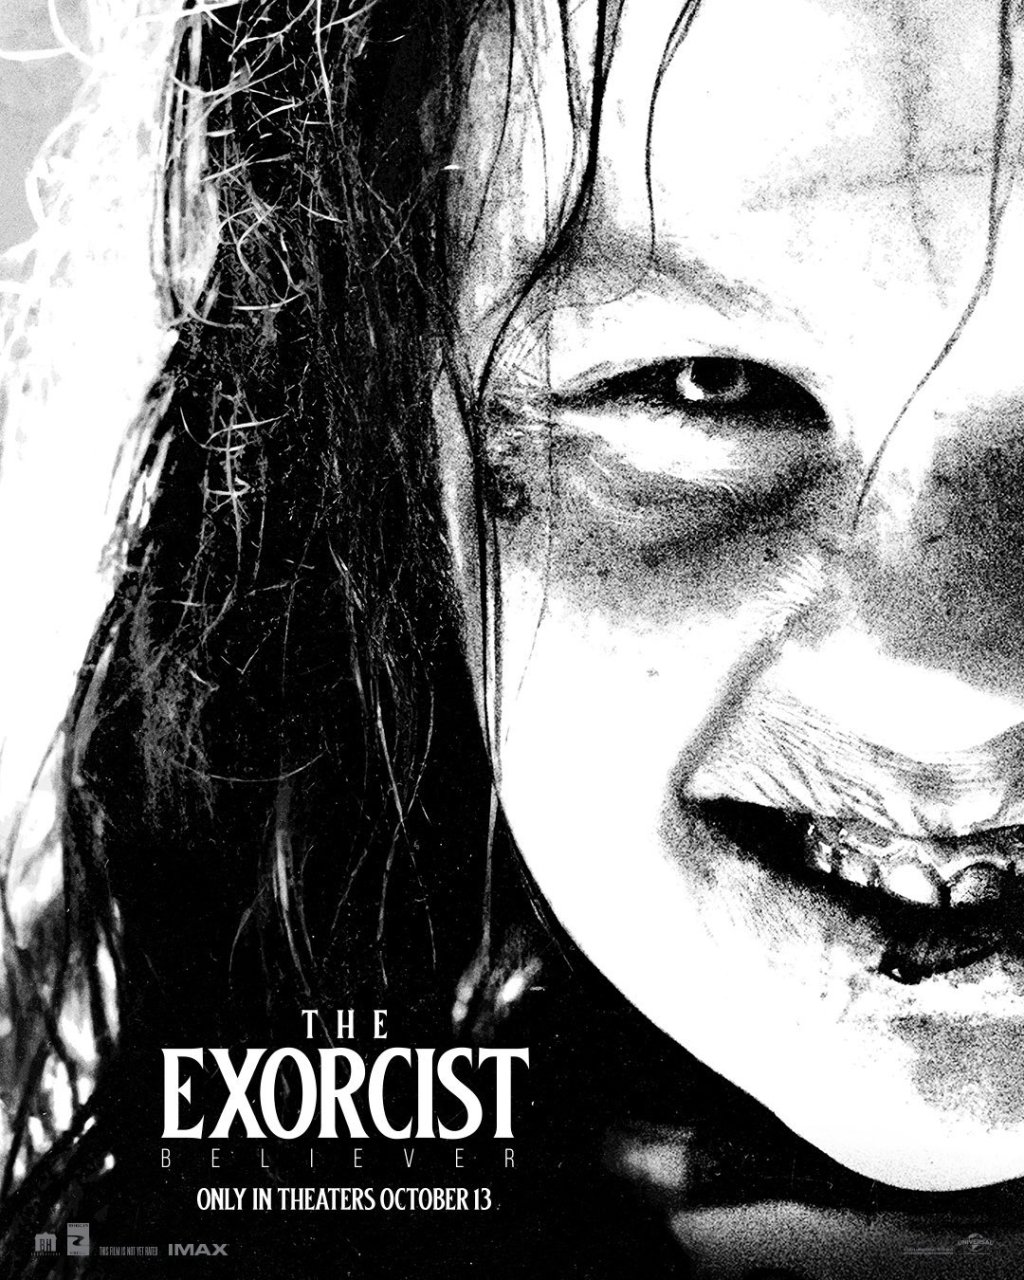 Movie News: The Exorcist: Believer Posters Released